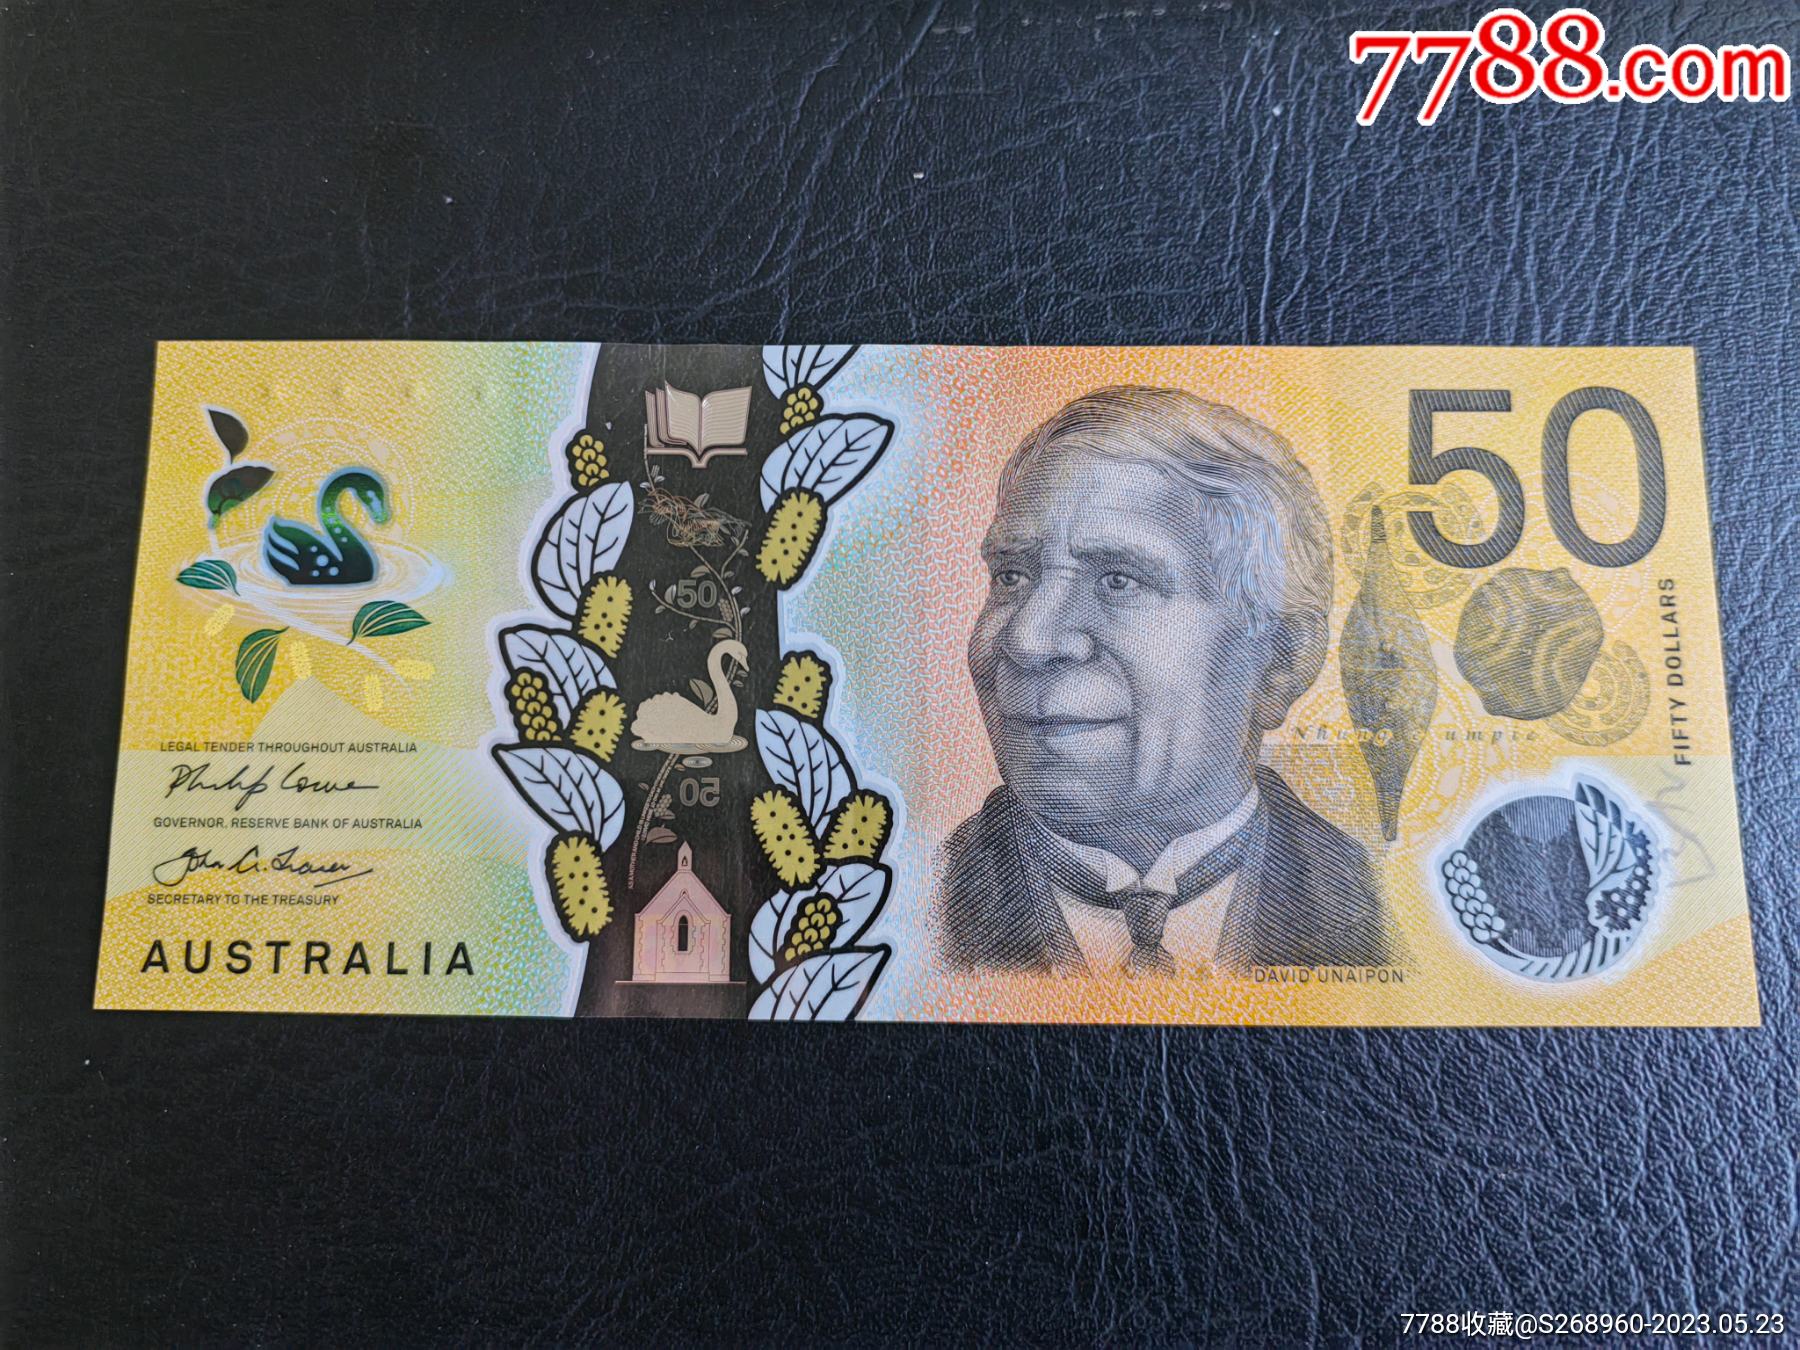 Australia's central bank prints 46 million $50 notes with a typo